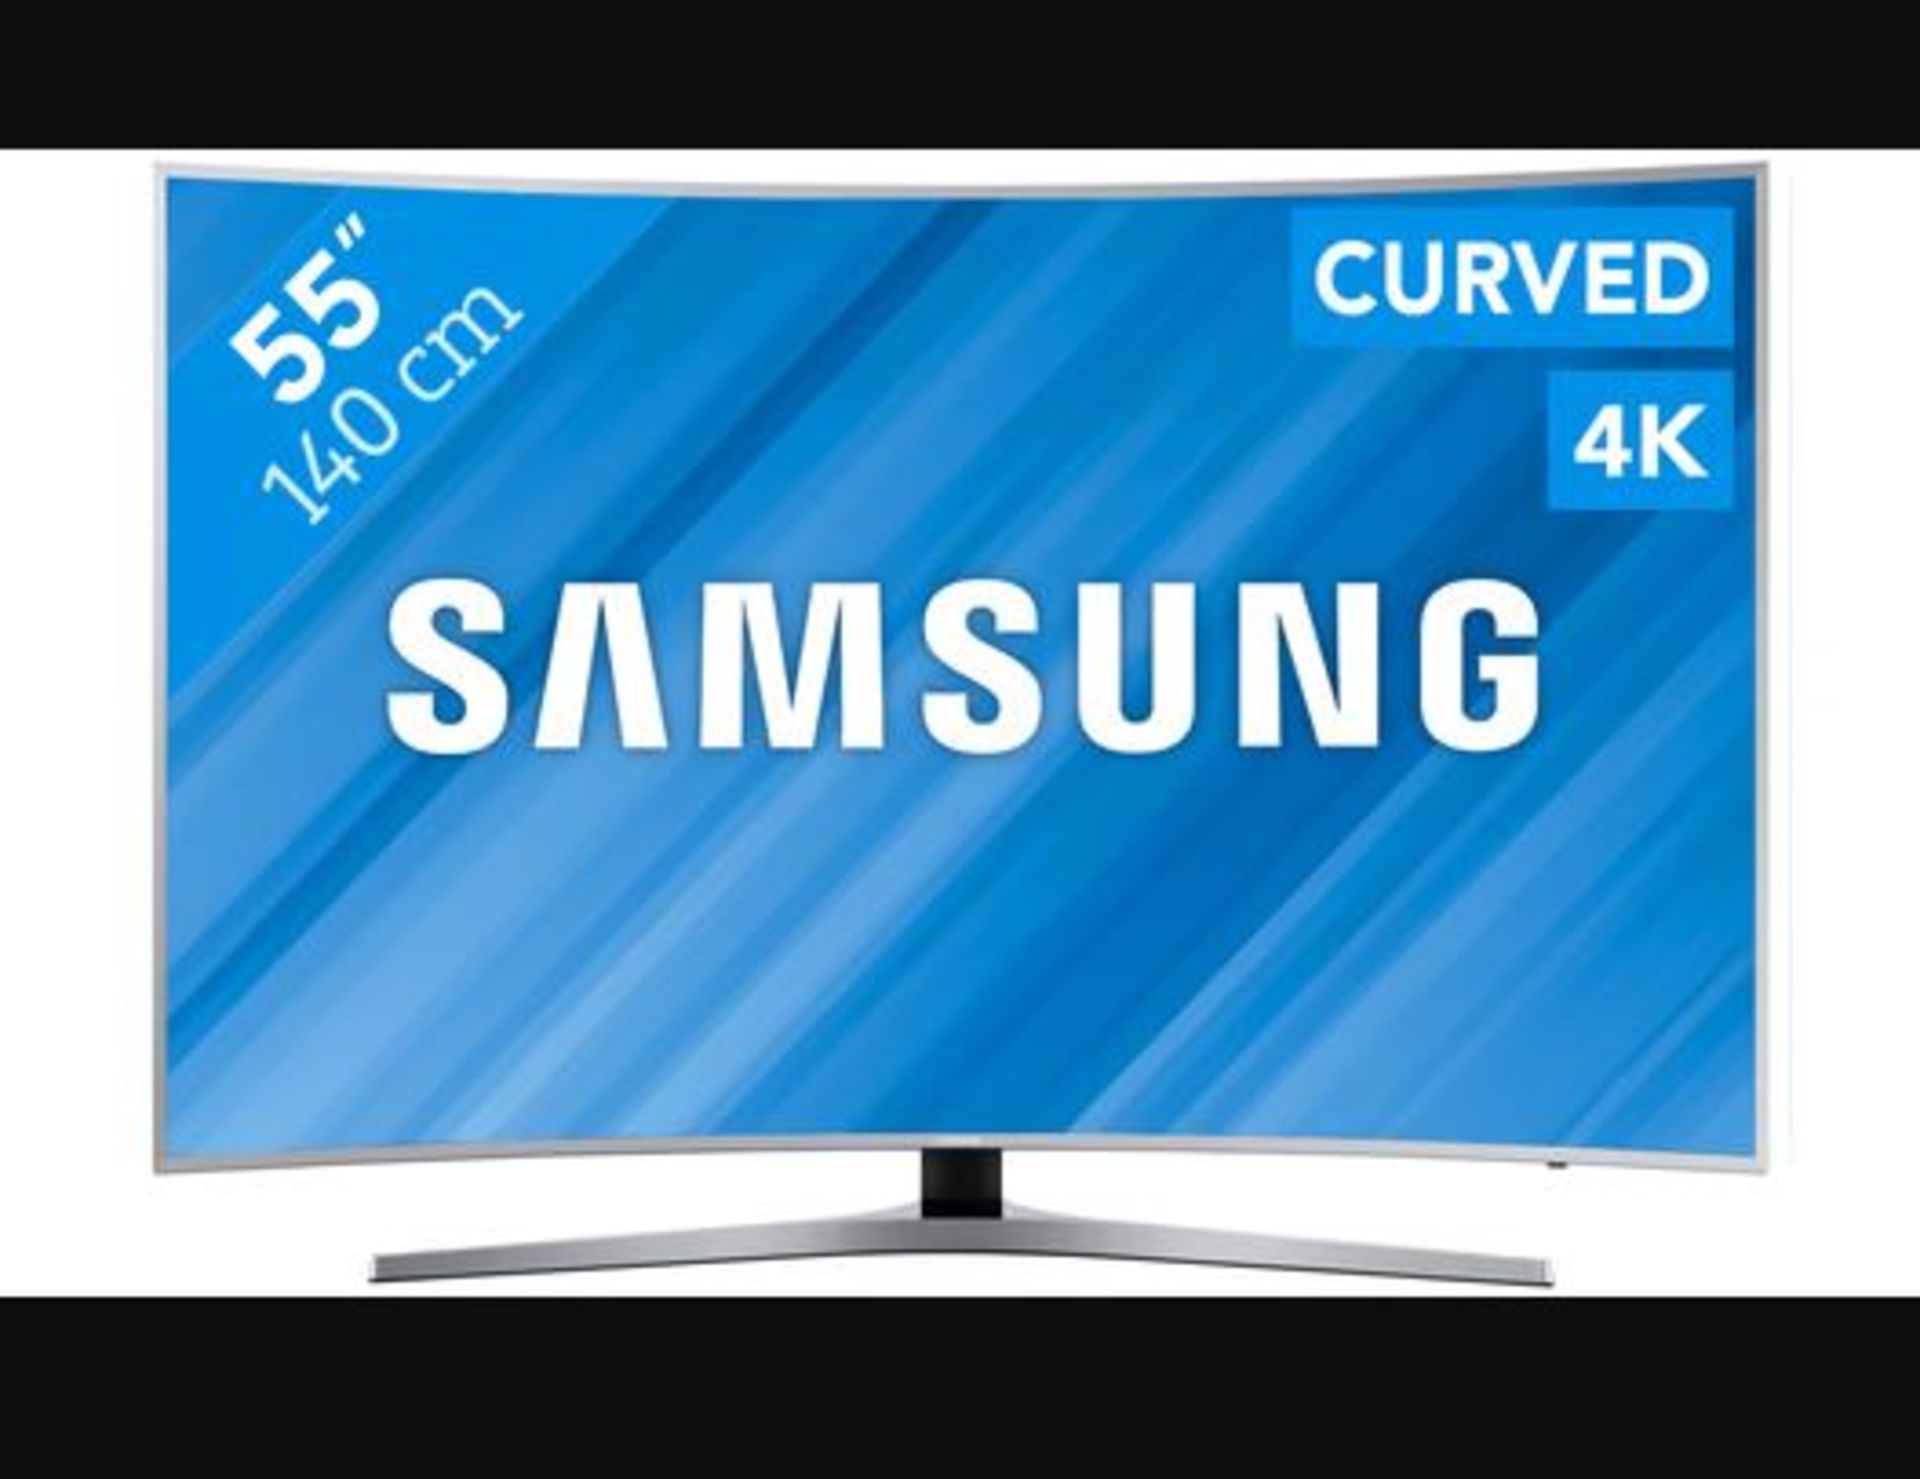 1 BOXED SAMSUNG UE55MU6500 CURVED HDR 4K ULTRA HD SMART TV, 55" WITH TVPLUS/FREESAT HD & ACTIVE